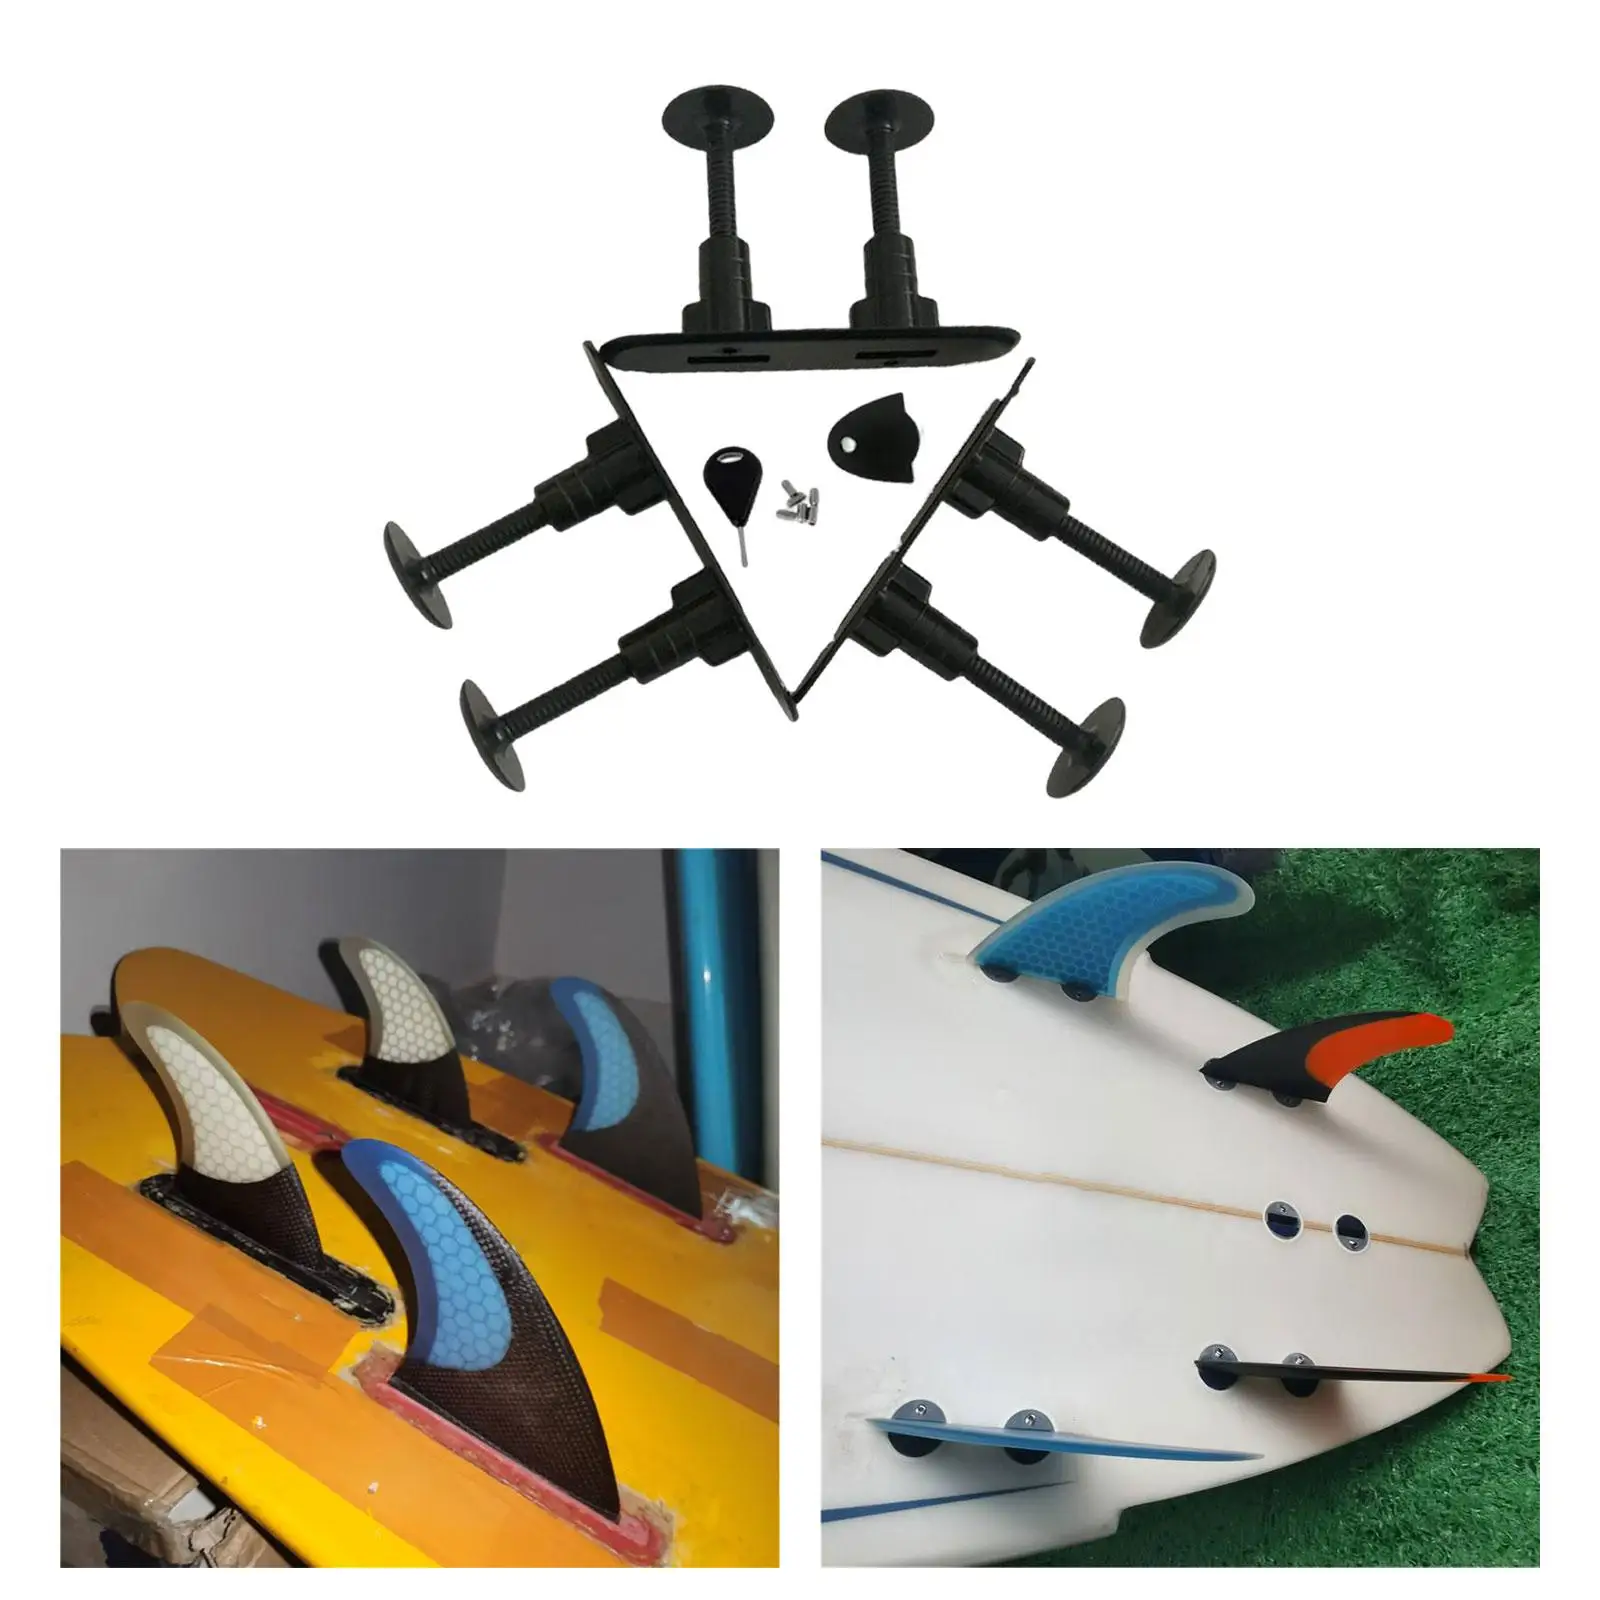 3 Pieces Surfboard Fin Plugs Double Tabs with Key and Screws PVC Paddleboard